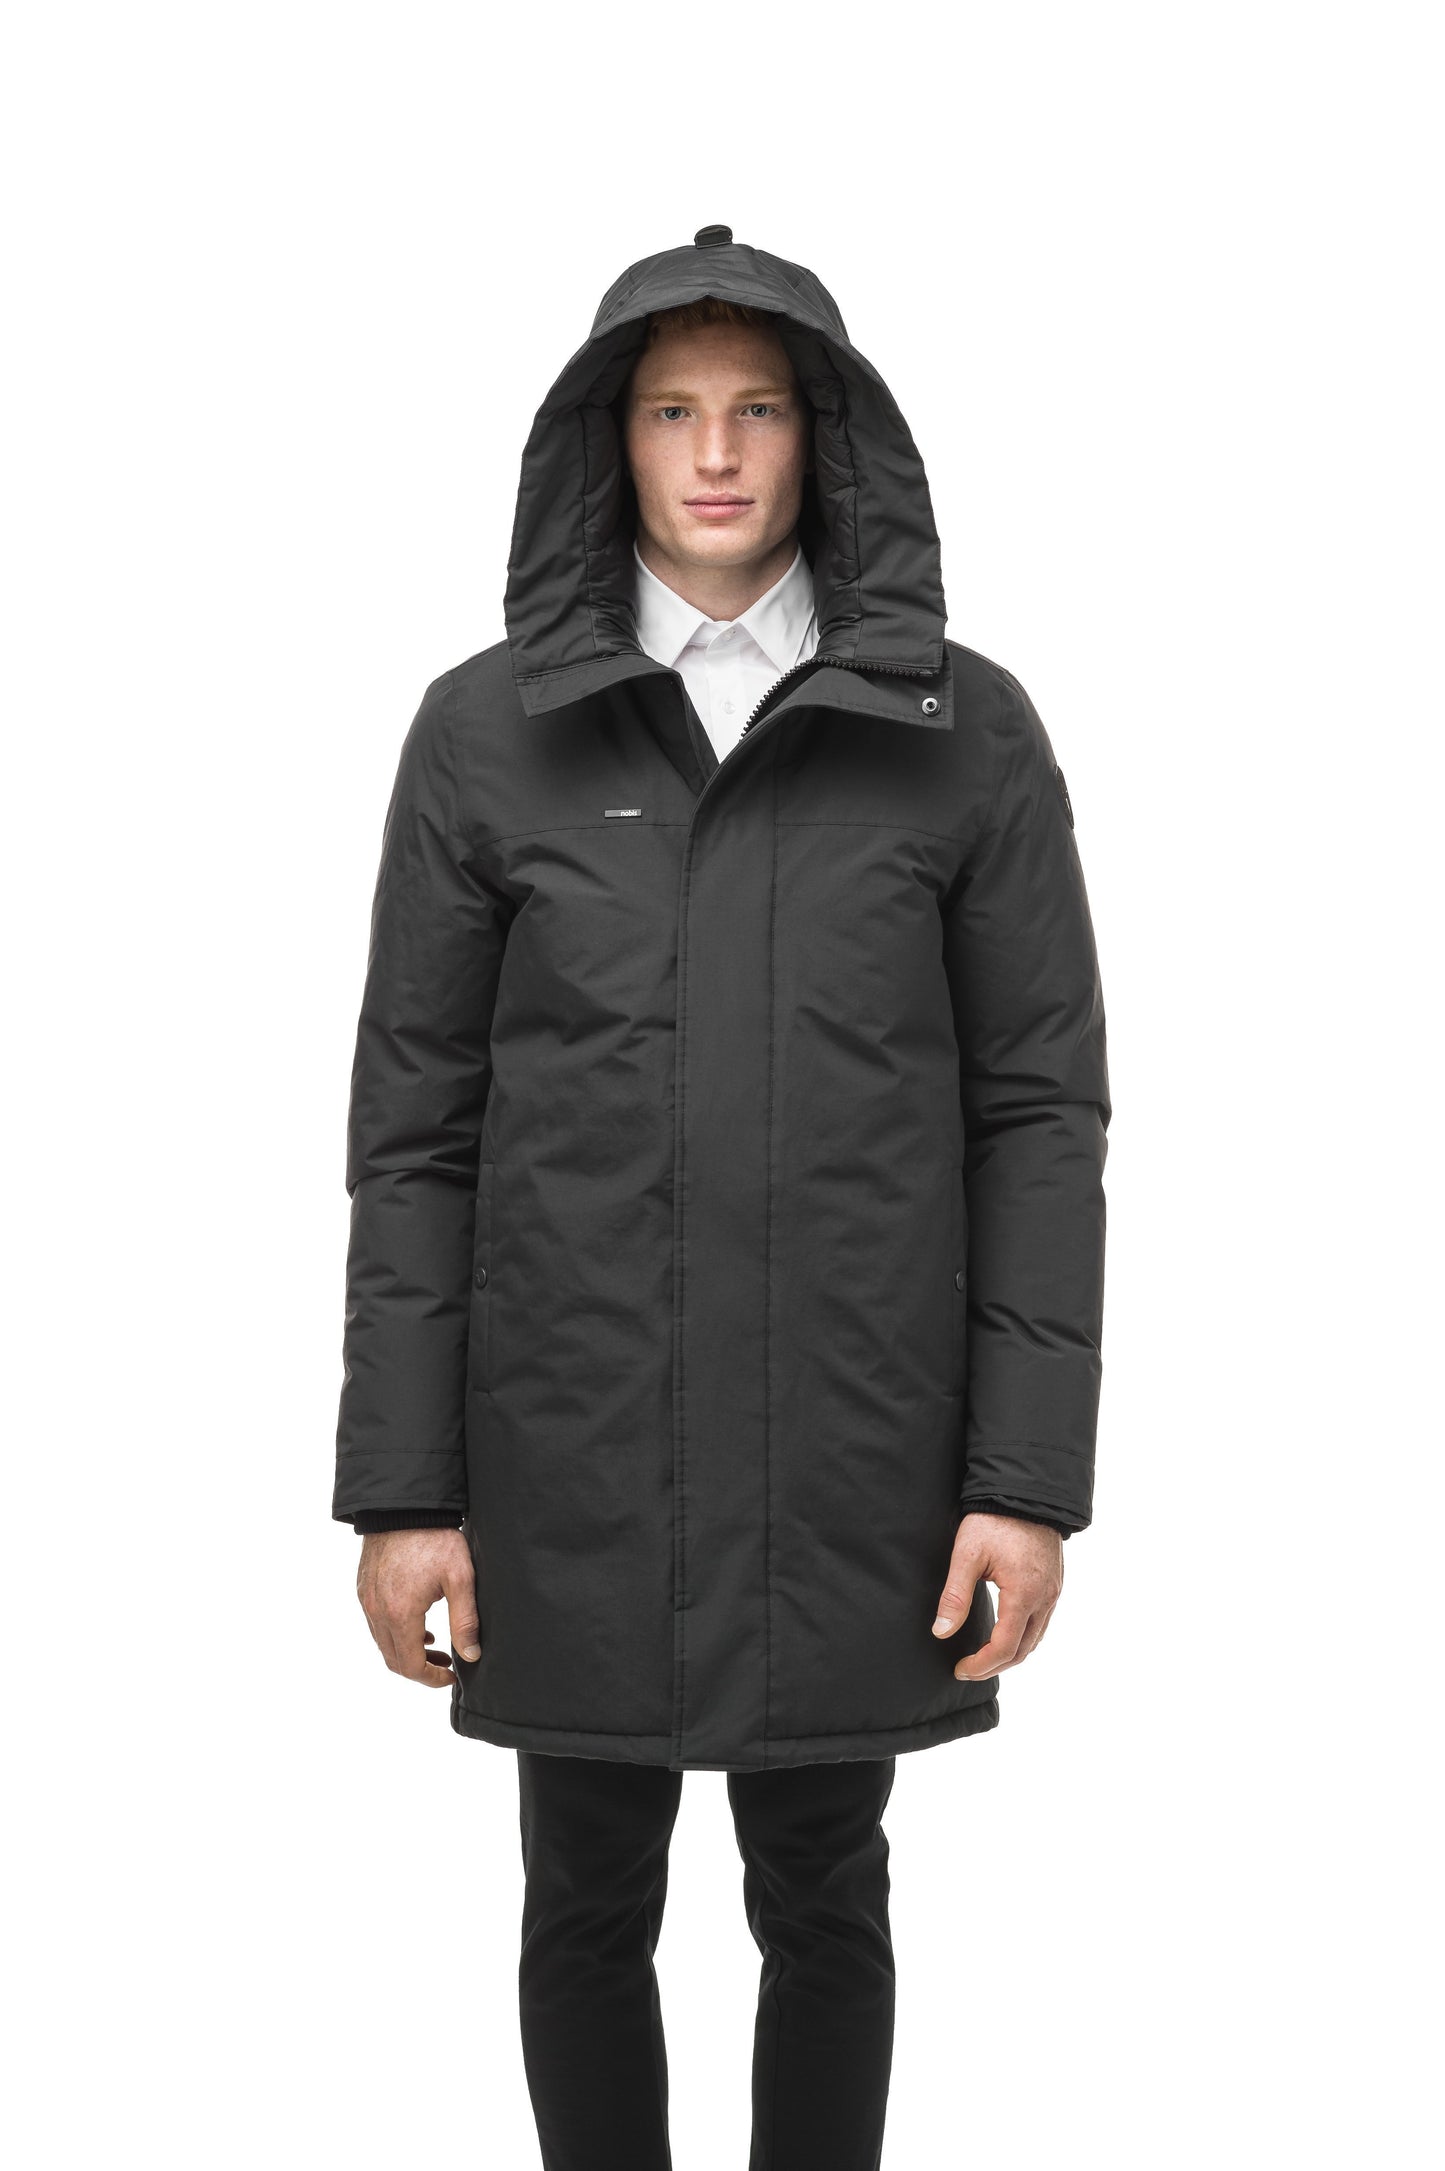 Classic men's down filled parka with attached fur free hood in Black